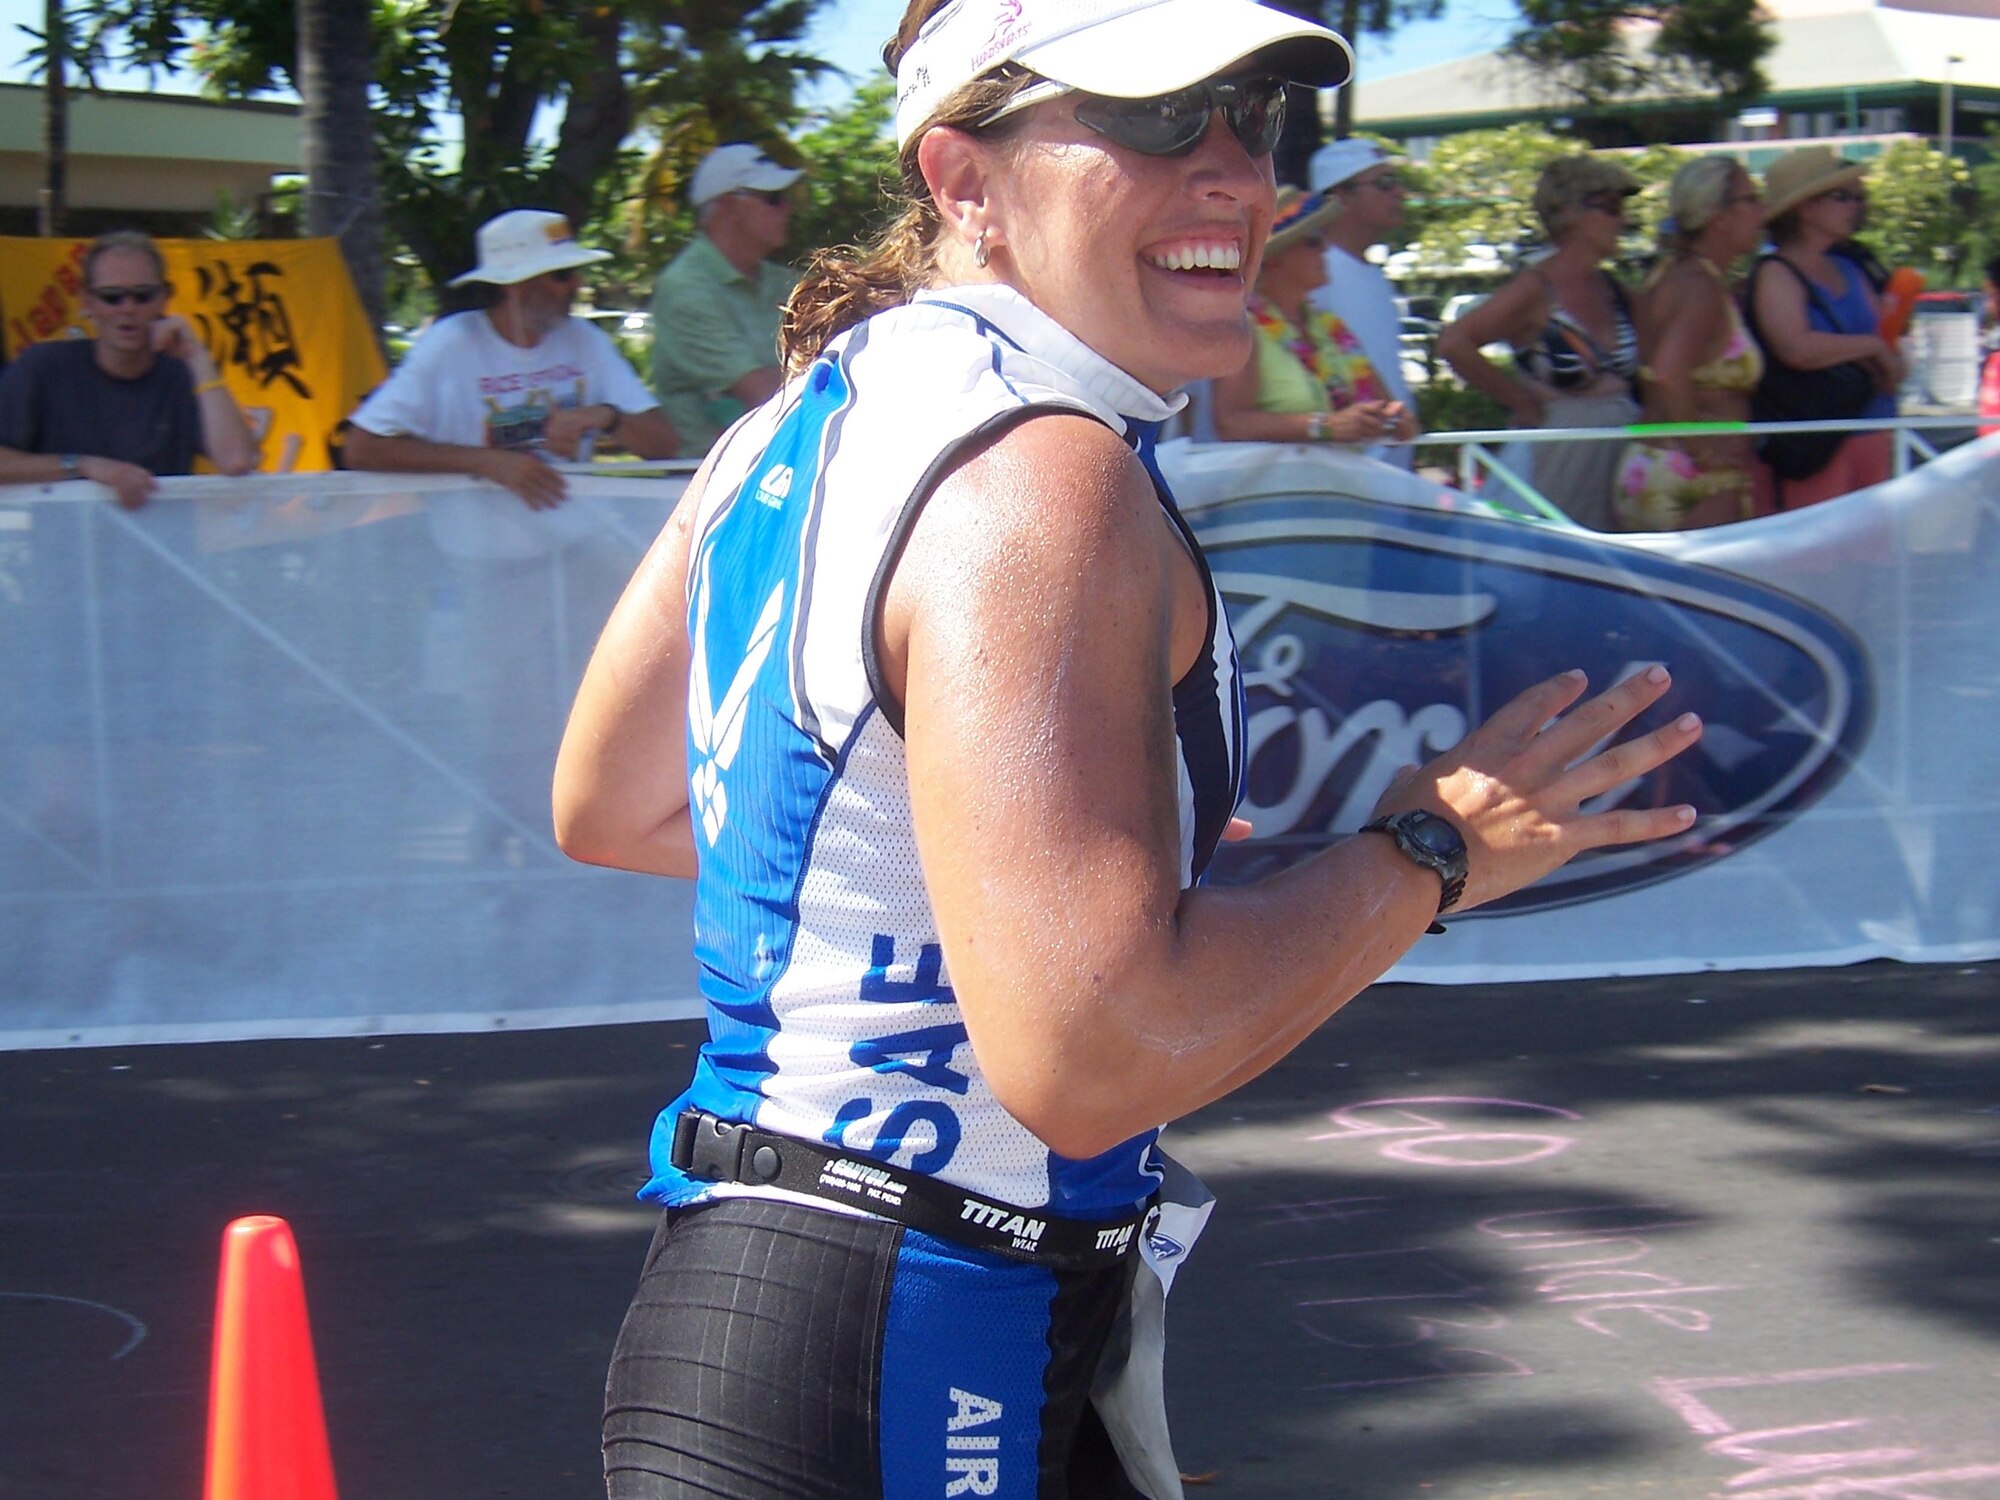 Capt. Abby Ruscetta, 16th Aircraft Maintenace Squadron, nears the finish line of the IronMan Triathalon Championship Oct. 15 in Kona, HI. Capt Ruscetta was one of two Hurlburt Airmen who participated in the event.